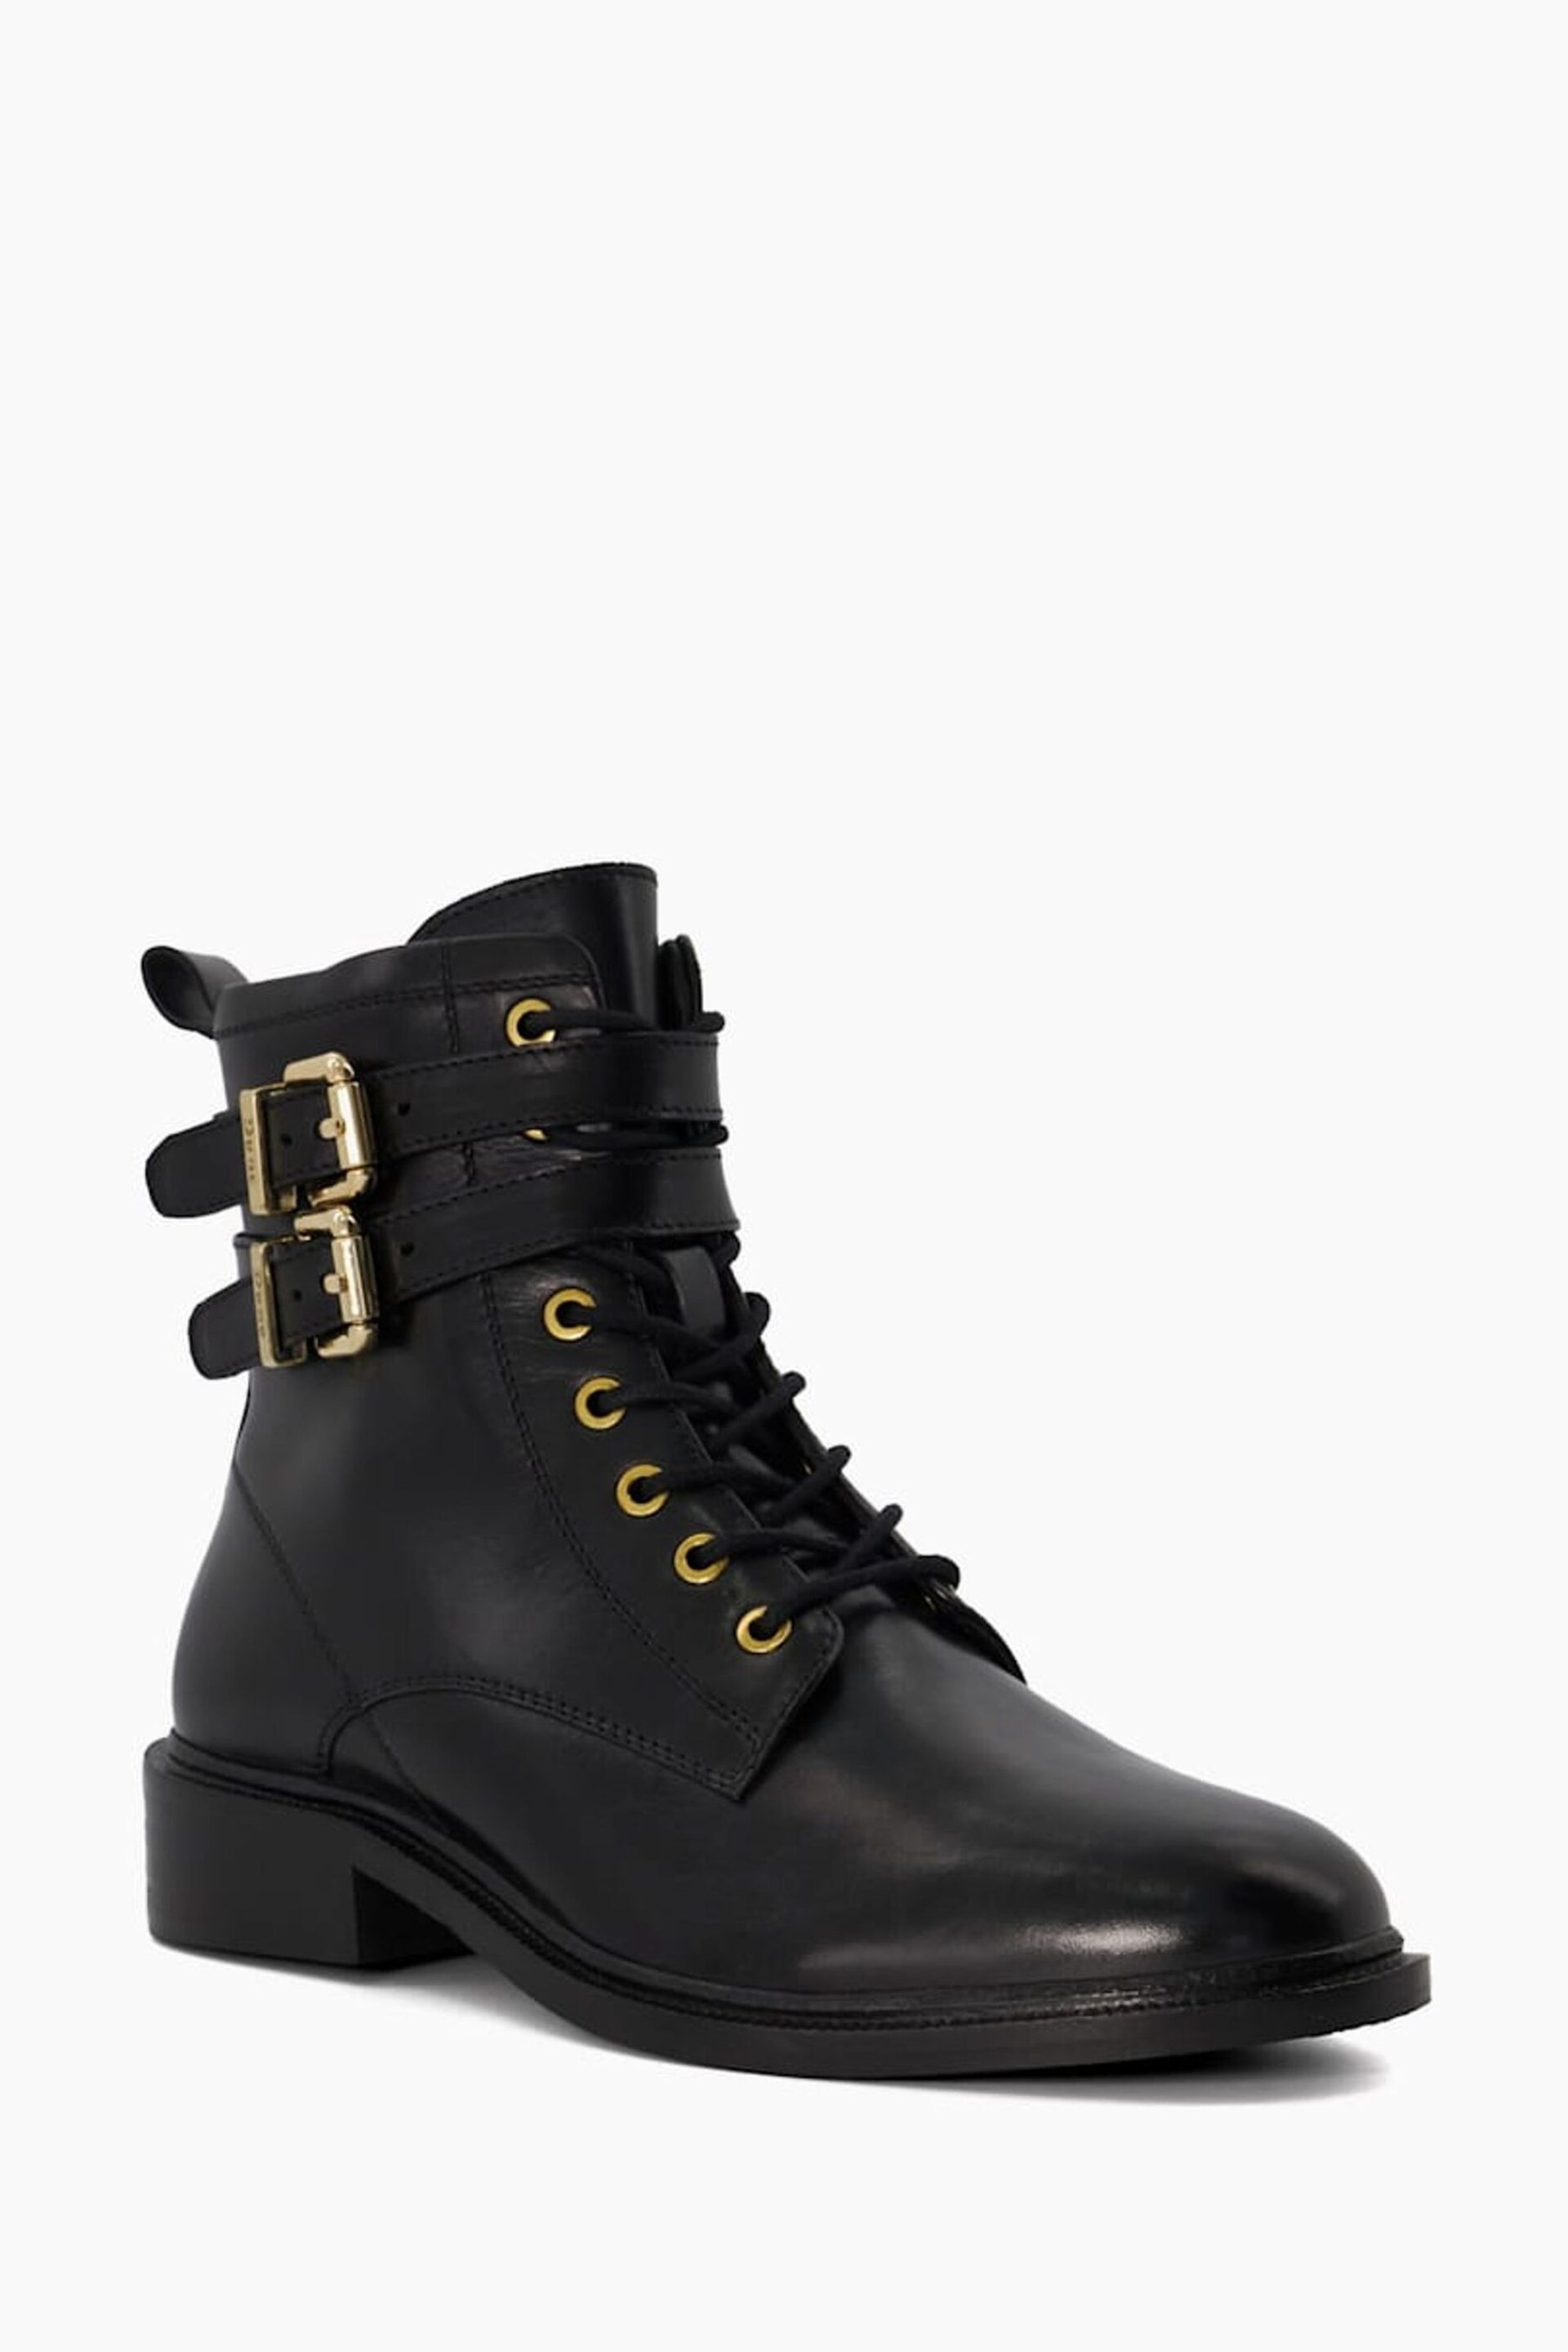 Dune London Black Double Buckle Lace-Up Phyllis Boots - Image 4 of 6